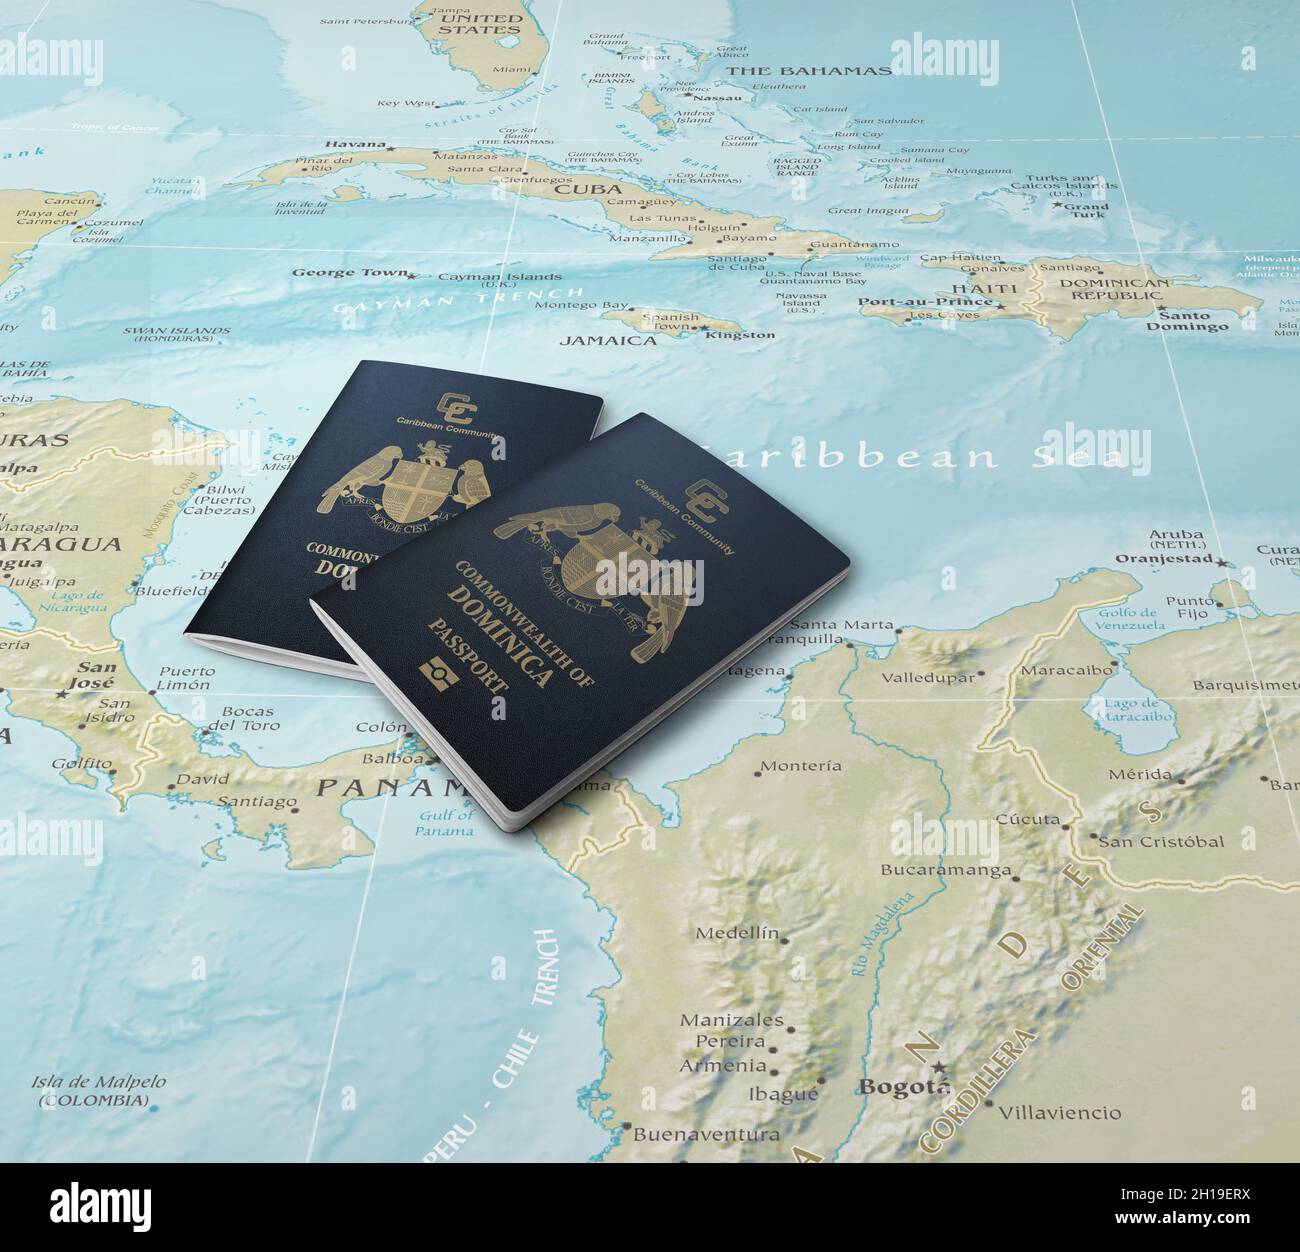 Passports of two Caribbean states Dominica on a map of the Caribbean Sea Stock Photo